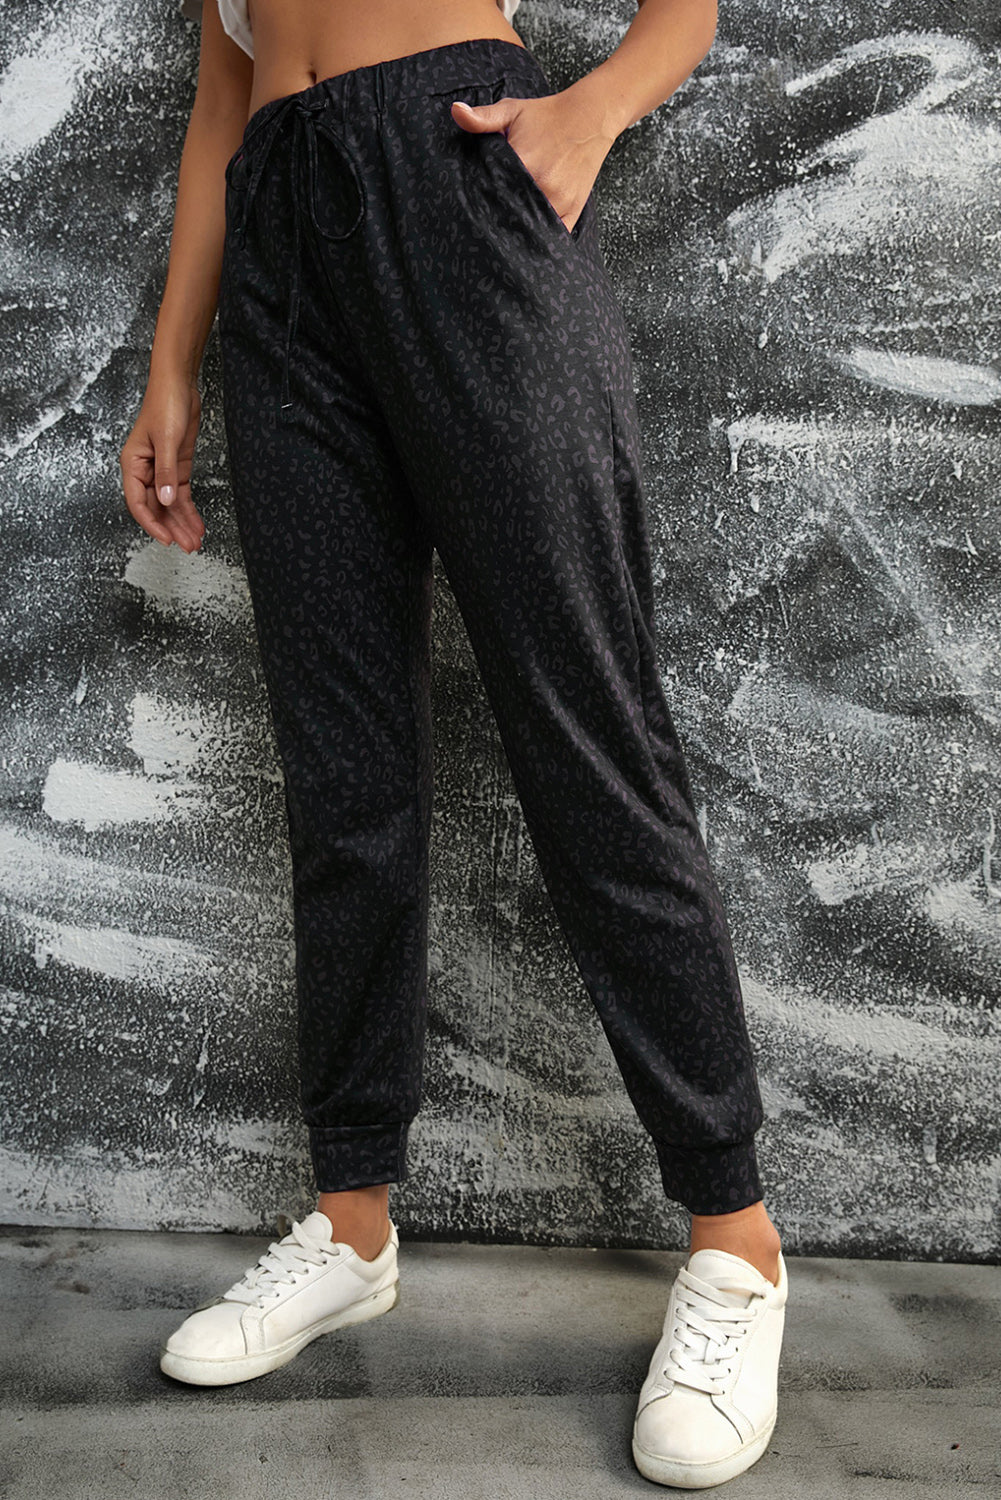 Leopard Print Joggers with Pockets - Dark Gray / S - Bottoms - Pants - 6 - 2024